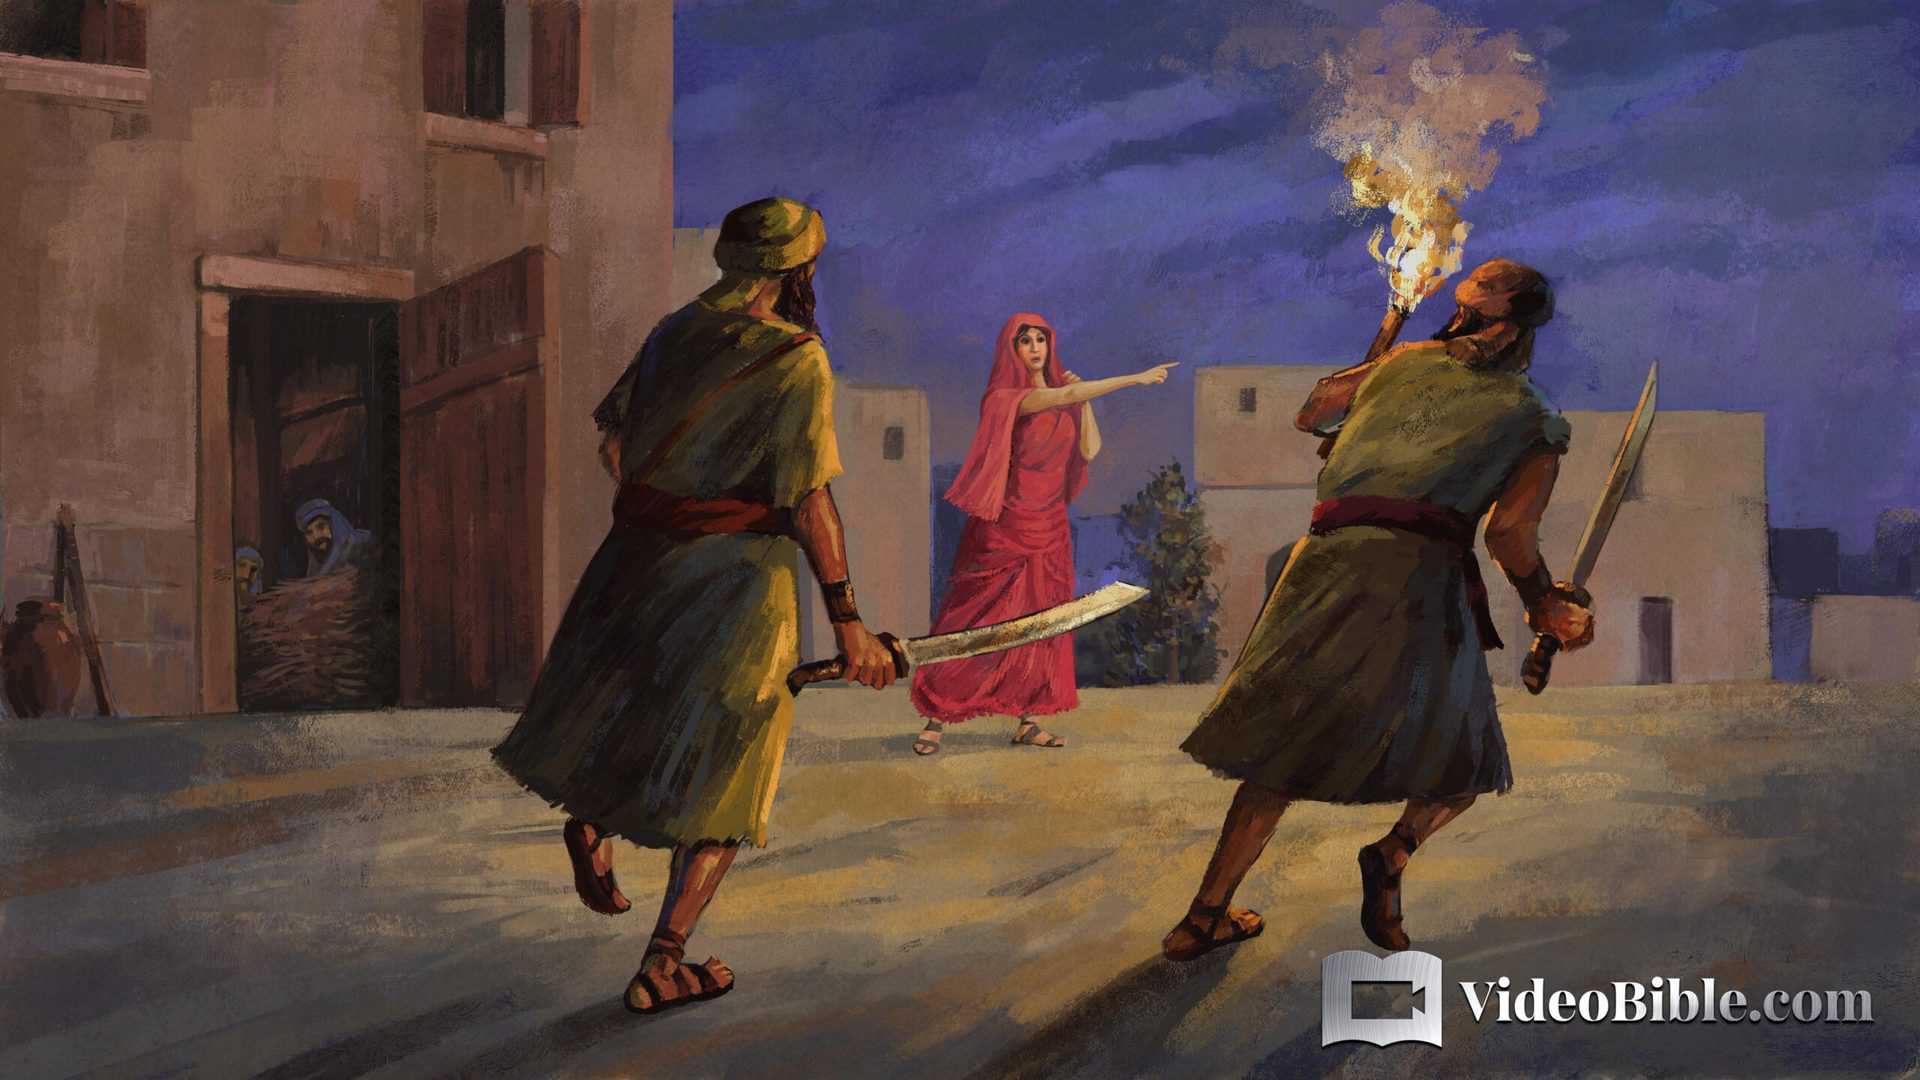 Rahab the prostitute helping the spies in Canaan at Jericho during promised land of Israel